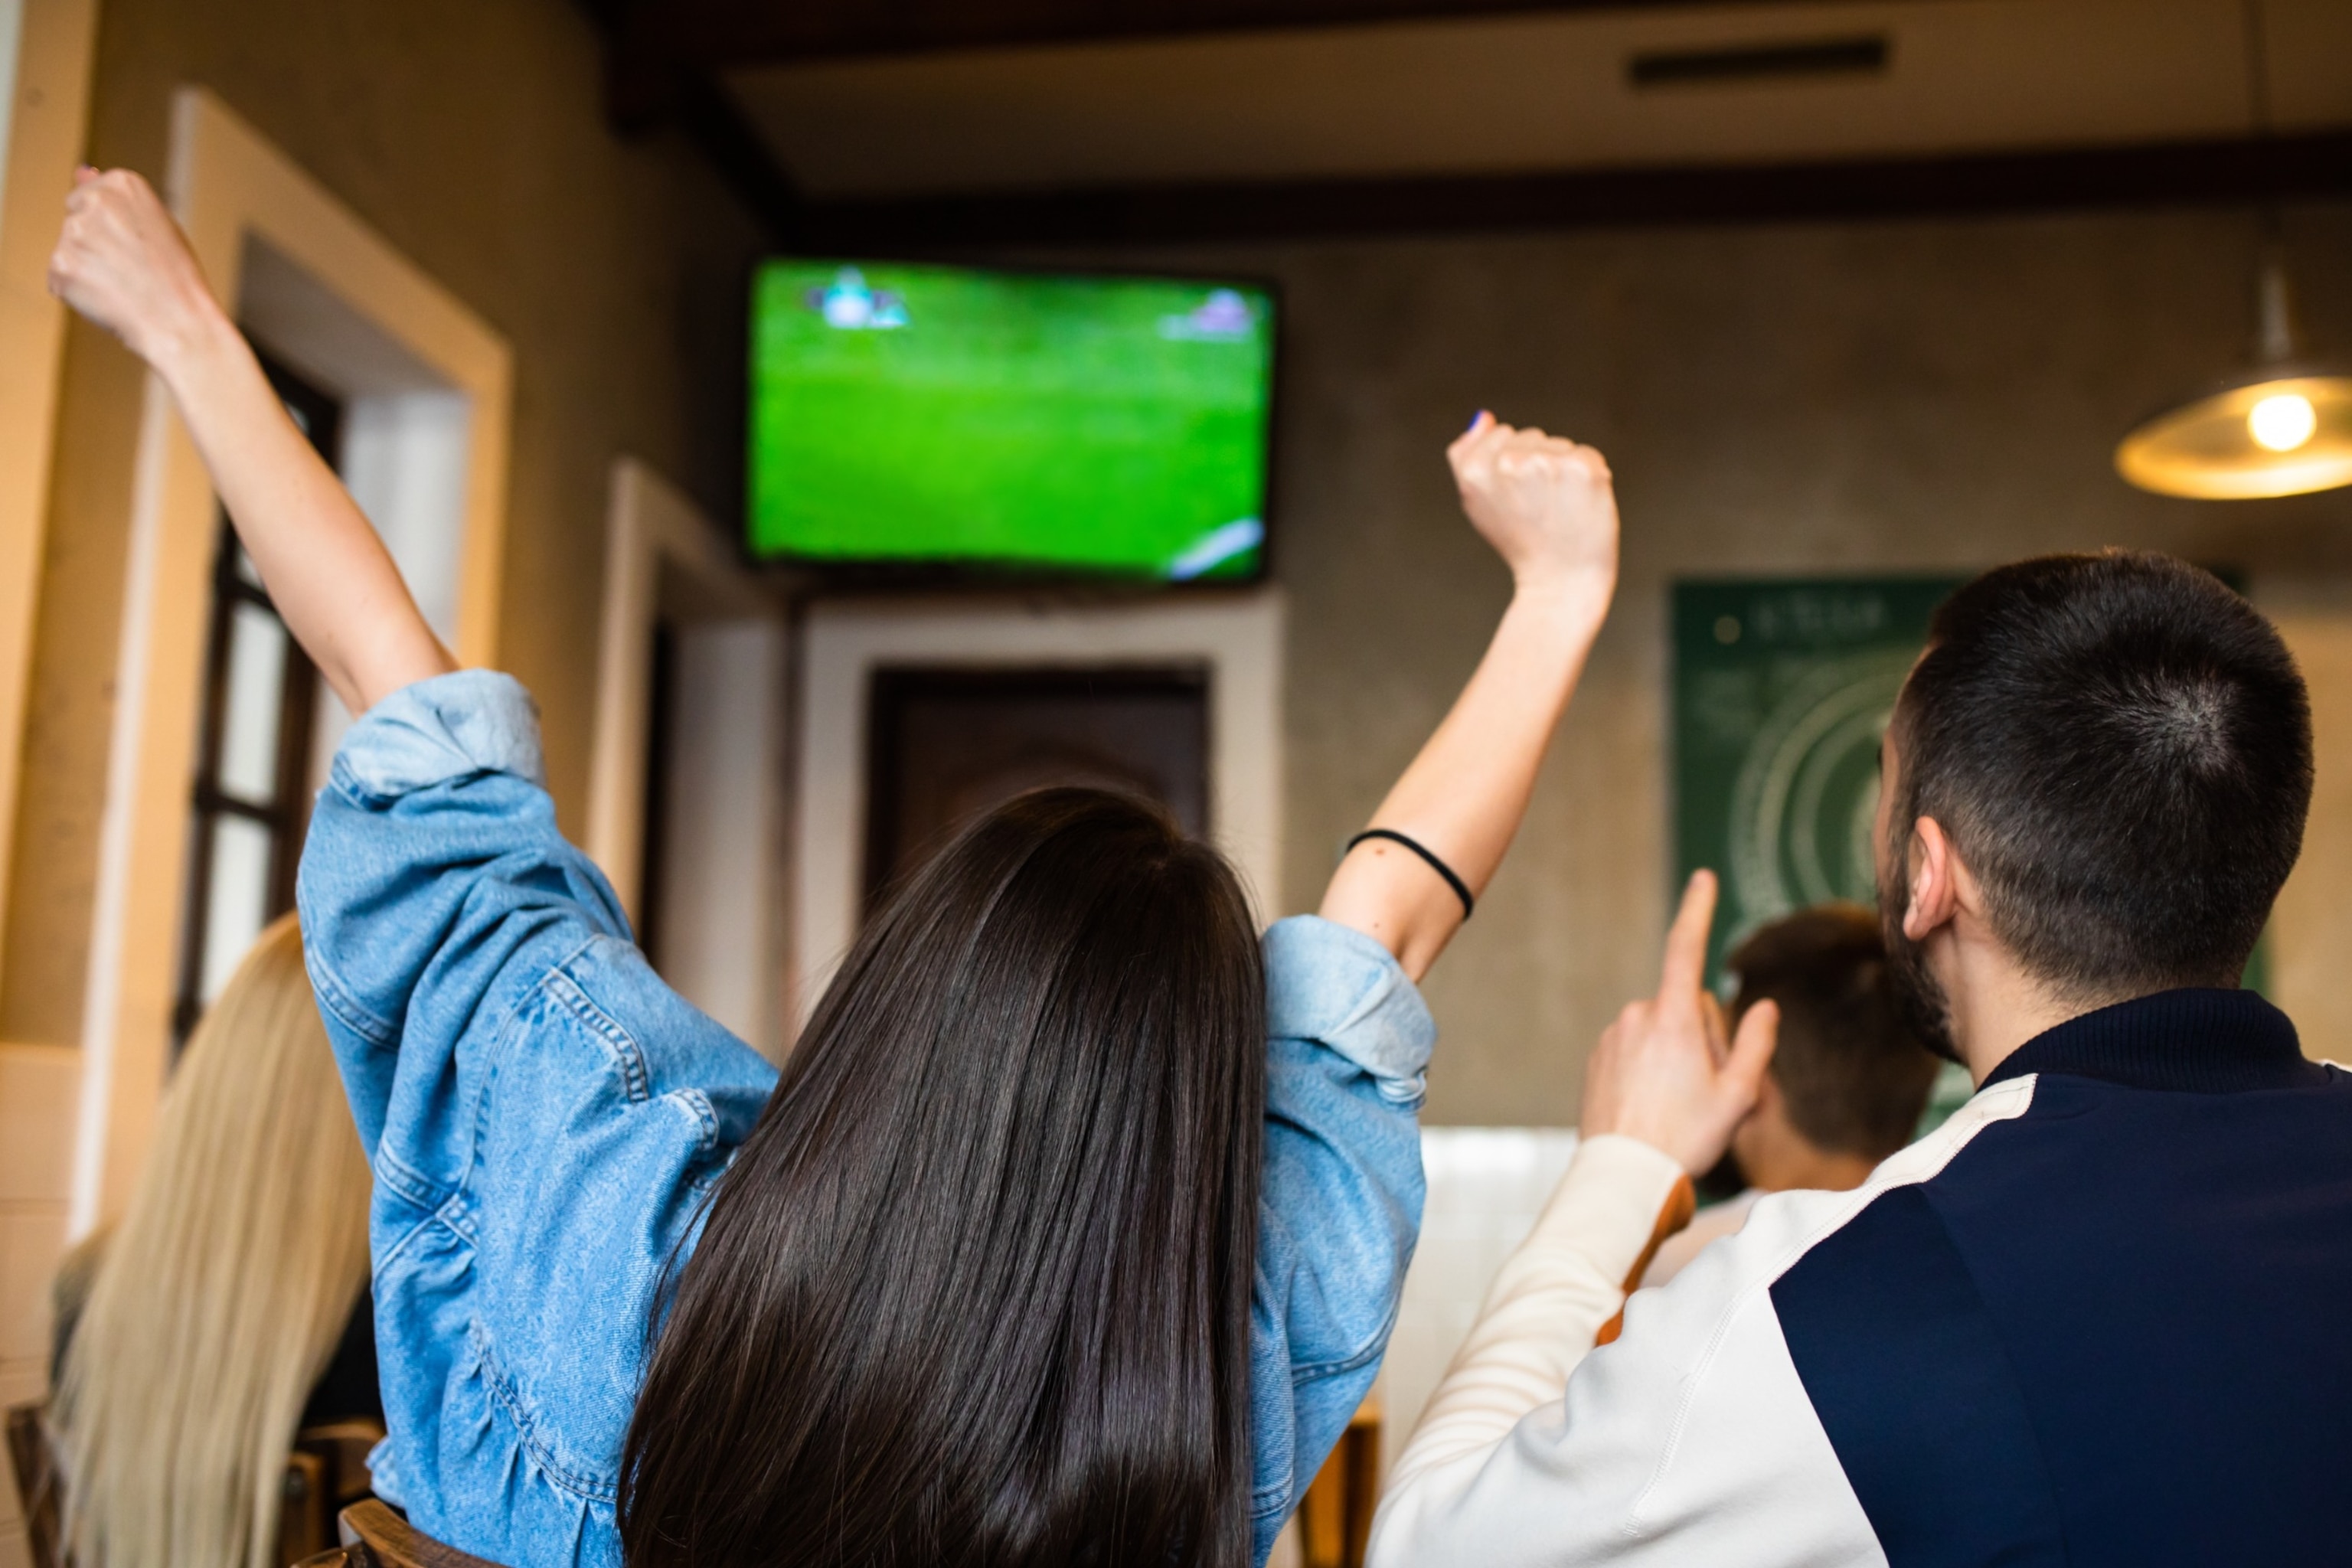 PHOTO: A group of friends watching a football game on TV at a bar.